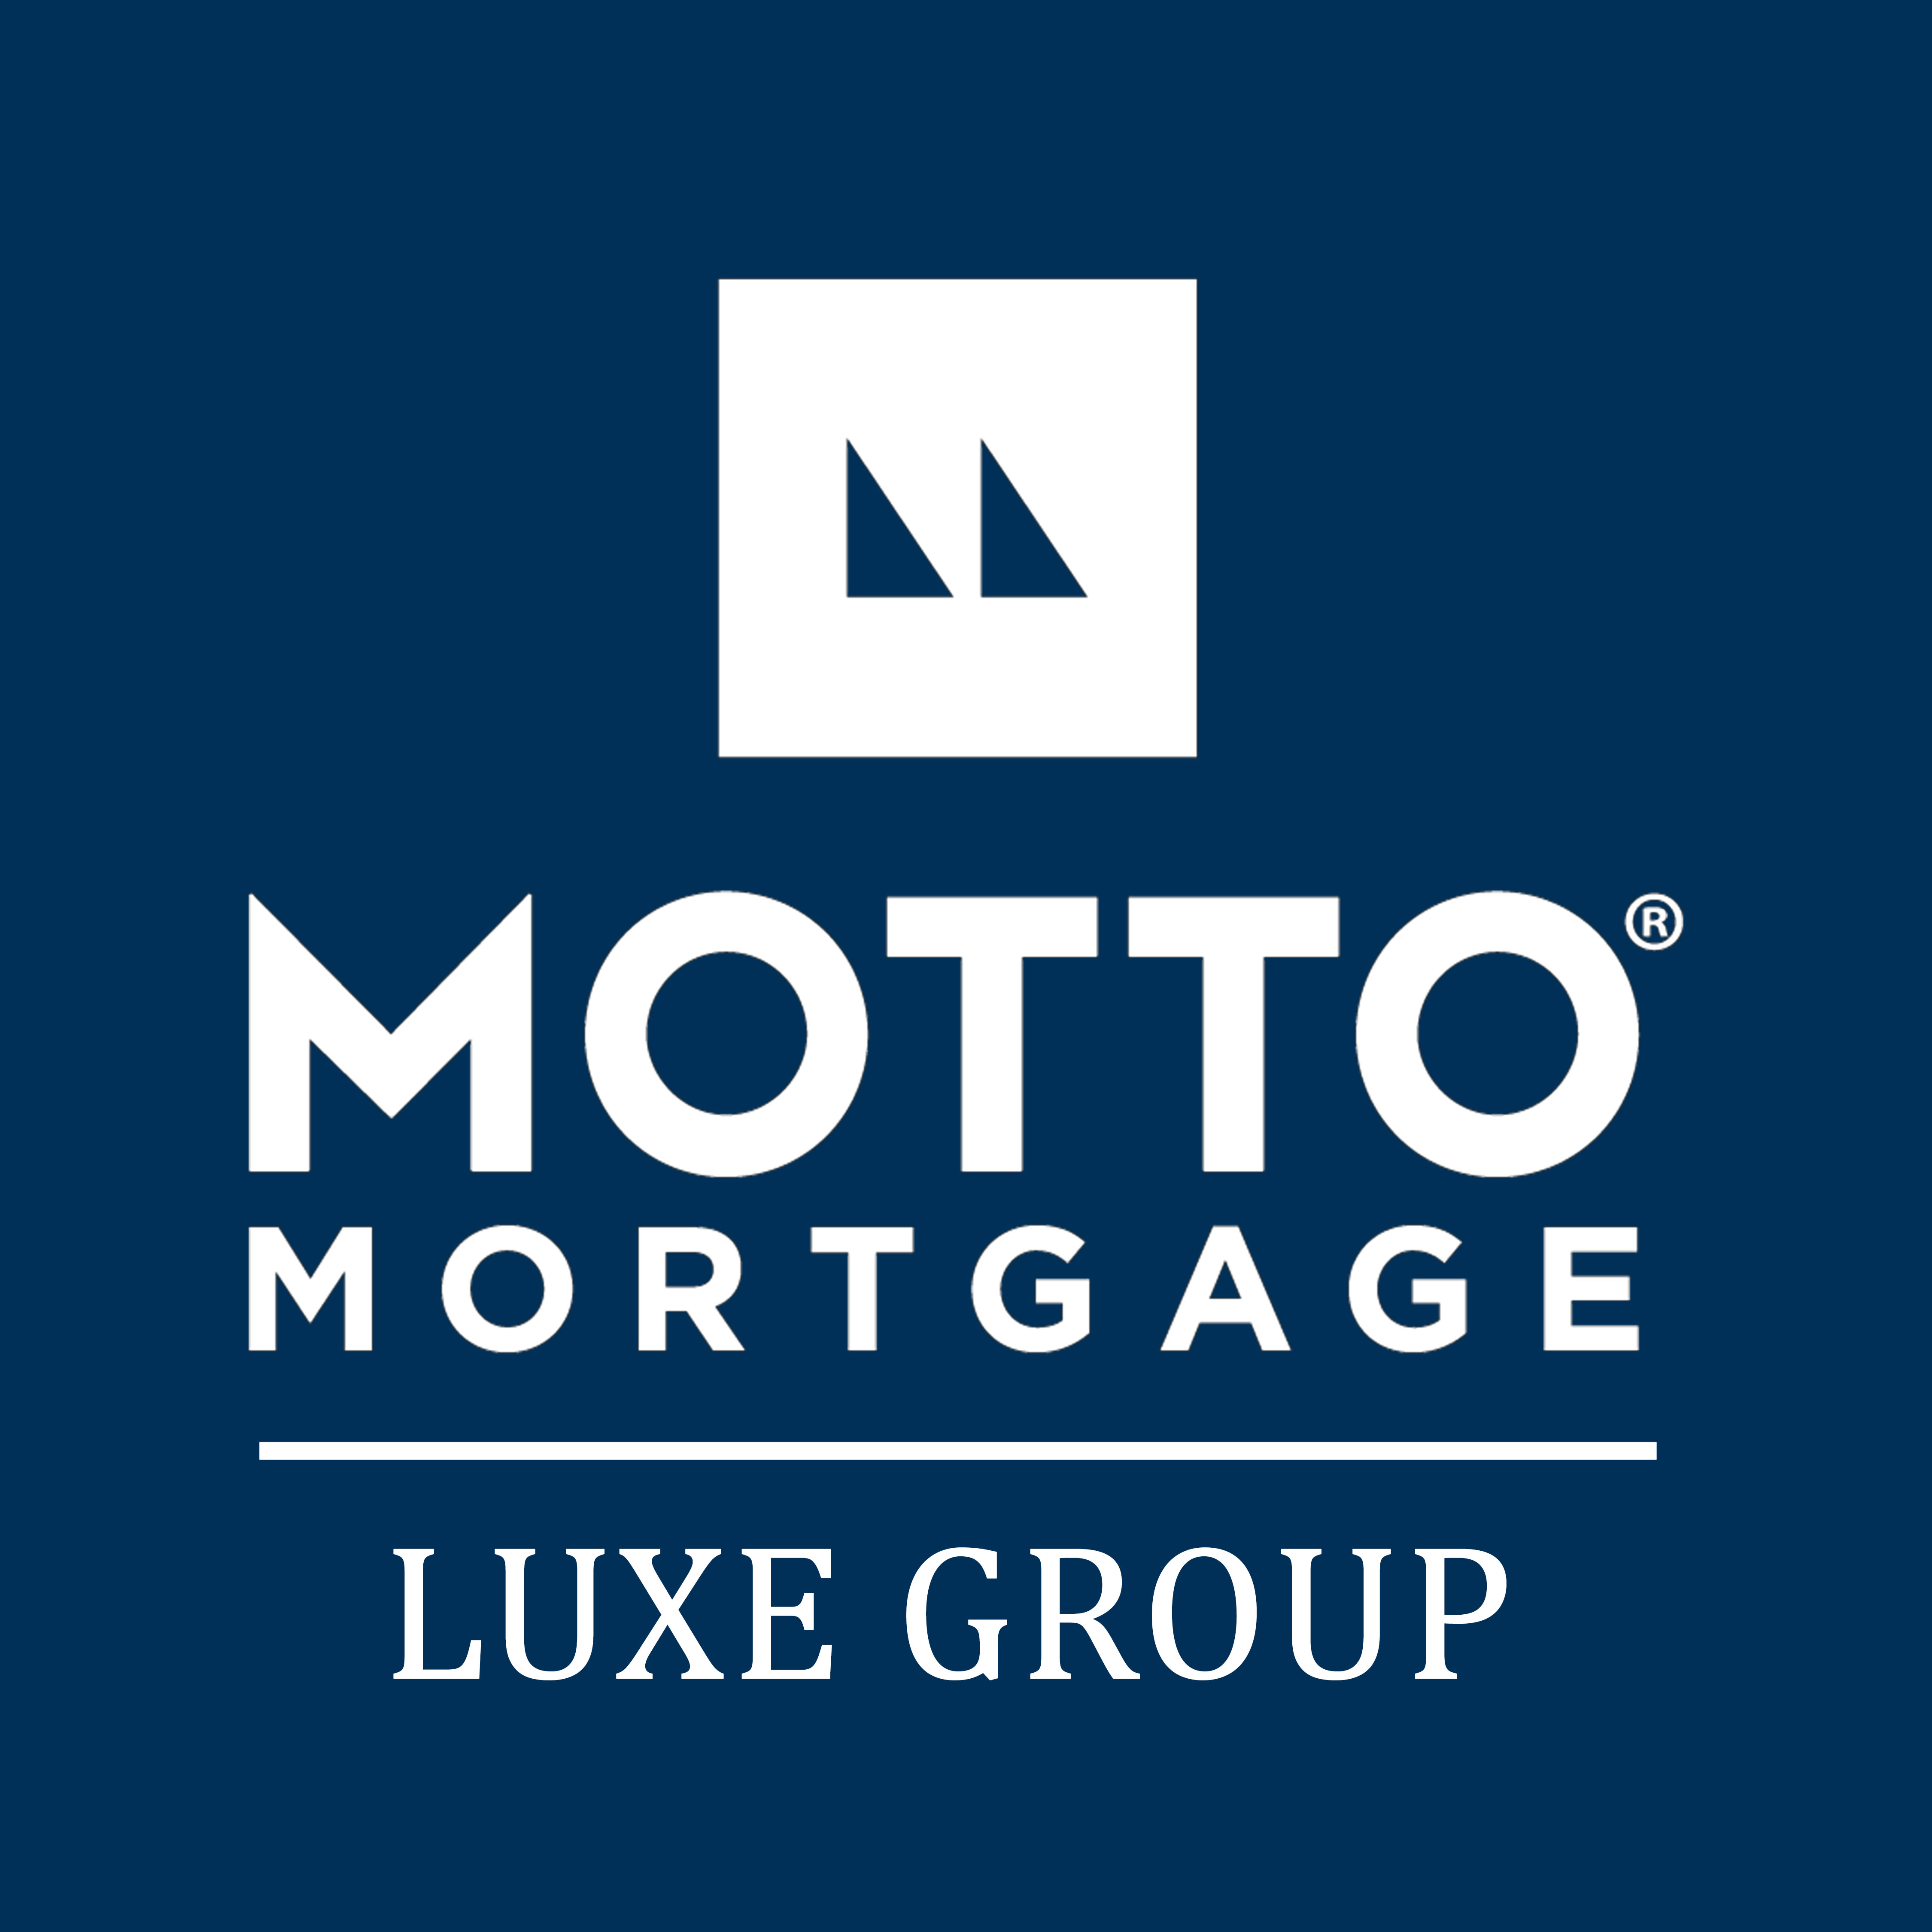 Motto Mortgage -  Luxe Group